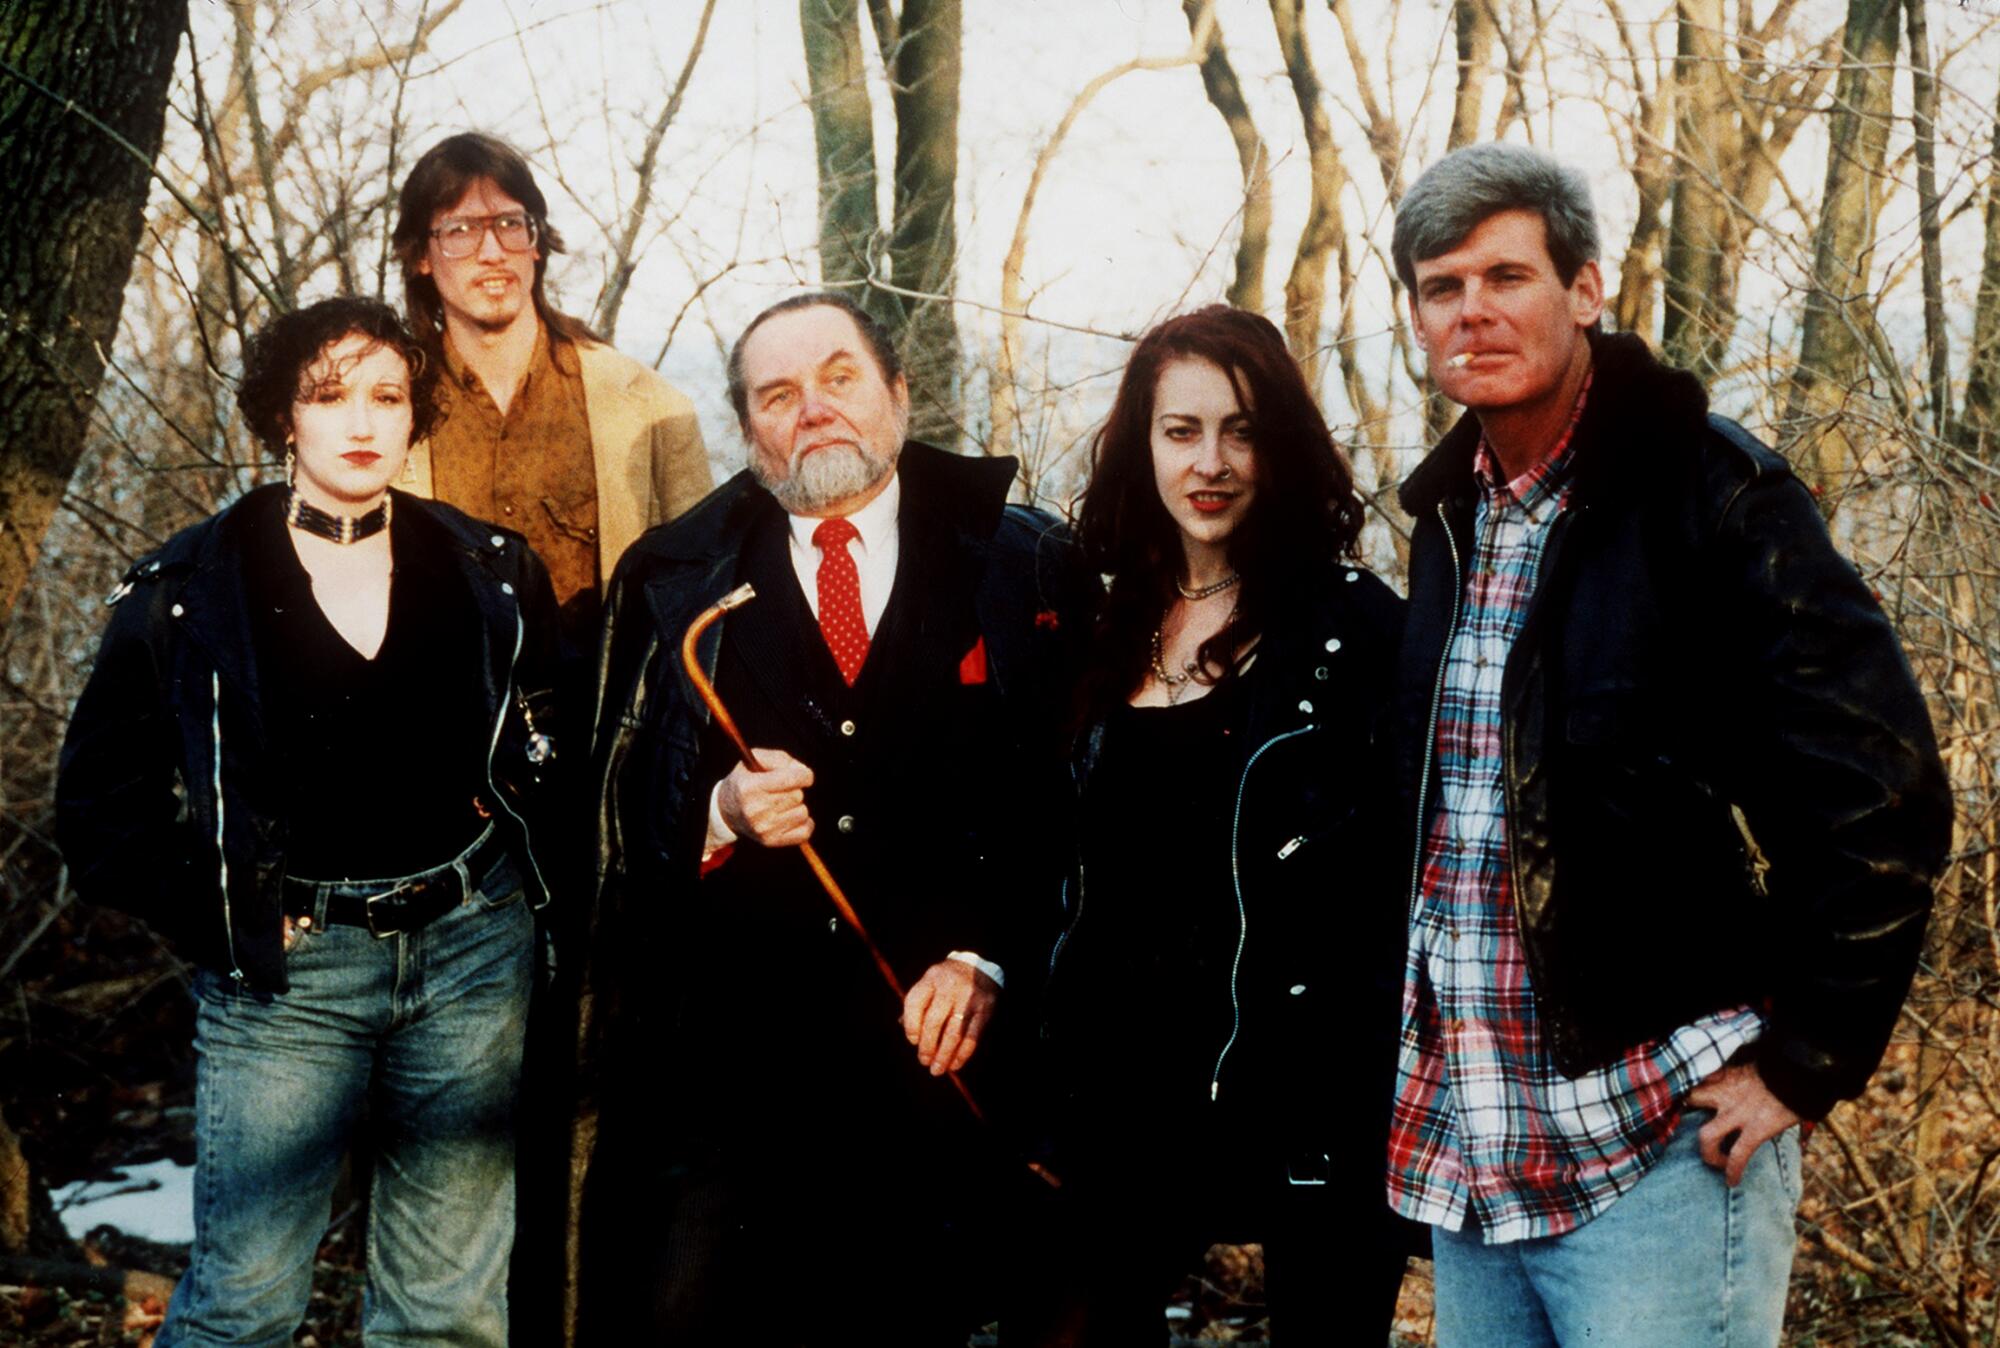 The cast of "Coven," from left, Miriam Frost, Mark Borchardt, Robert Richard Jorge, Sheri Beaupre and Tom Schimmels.